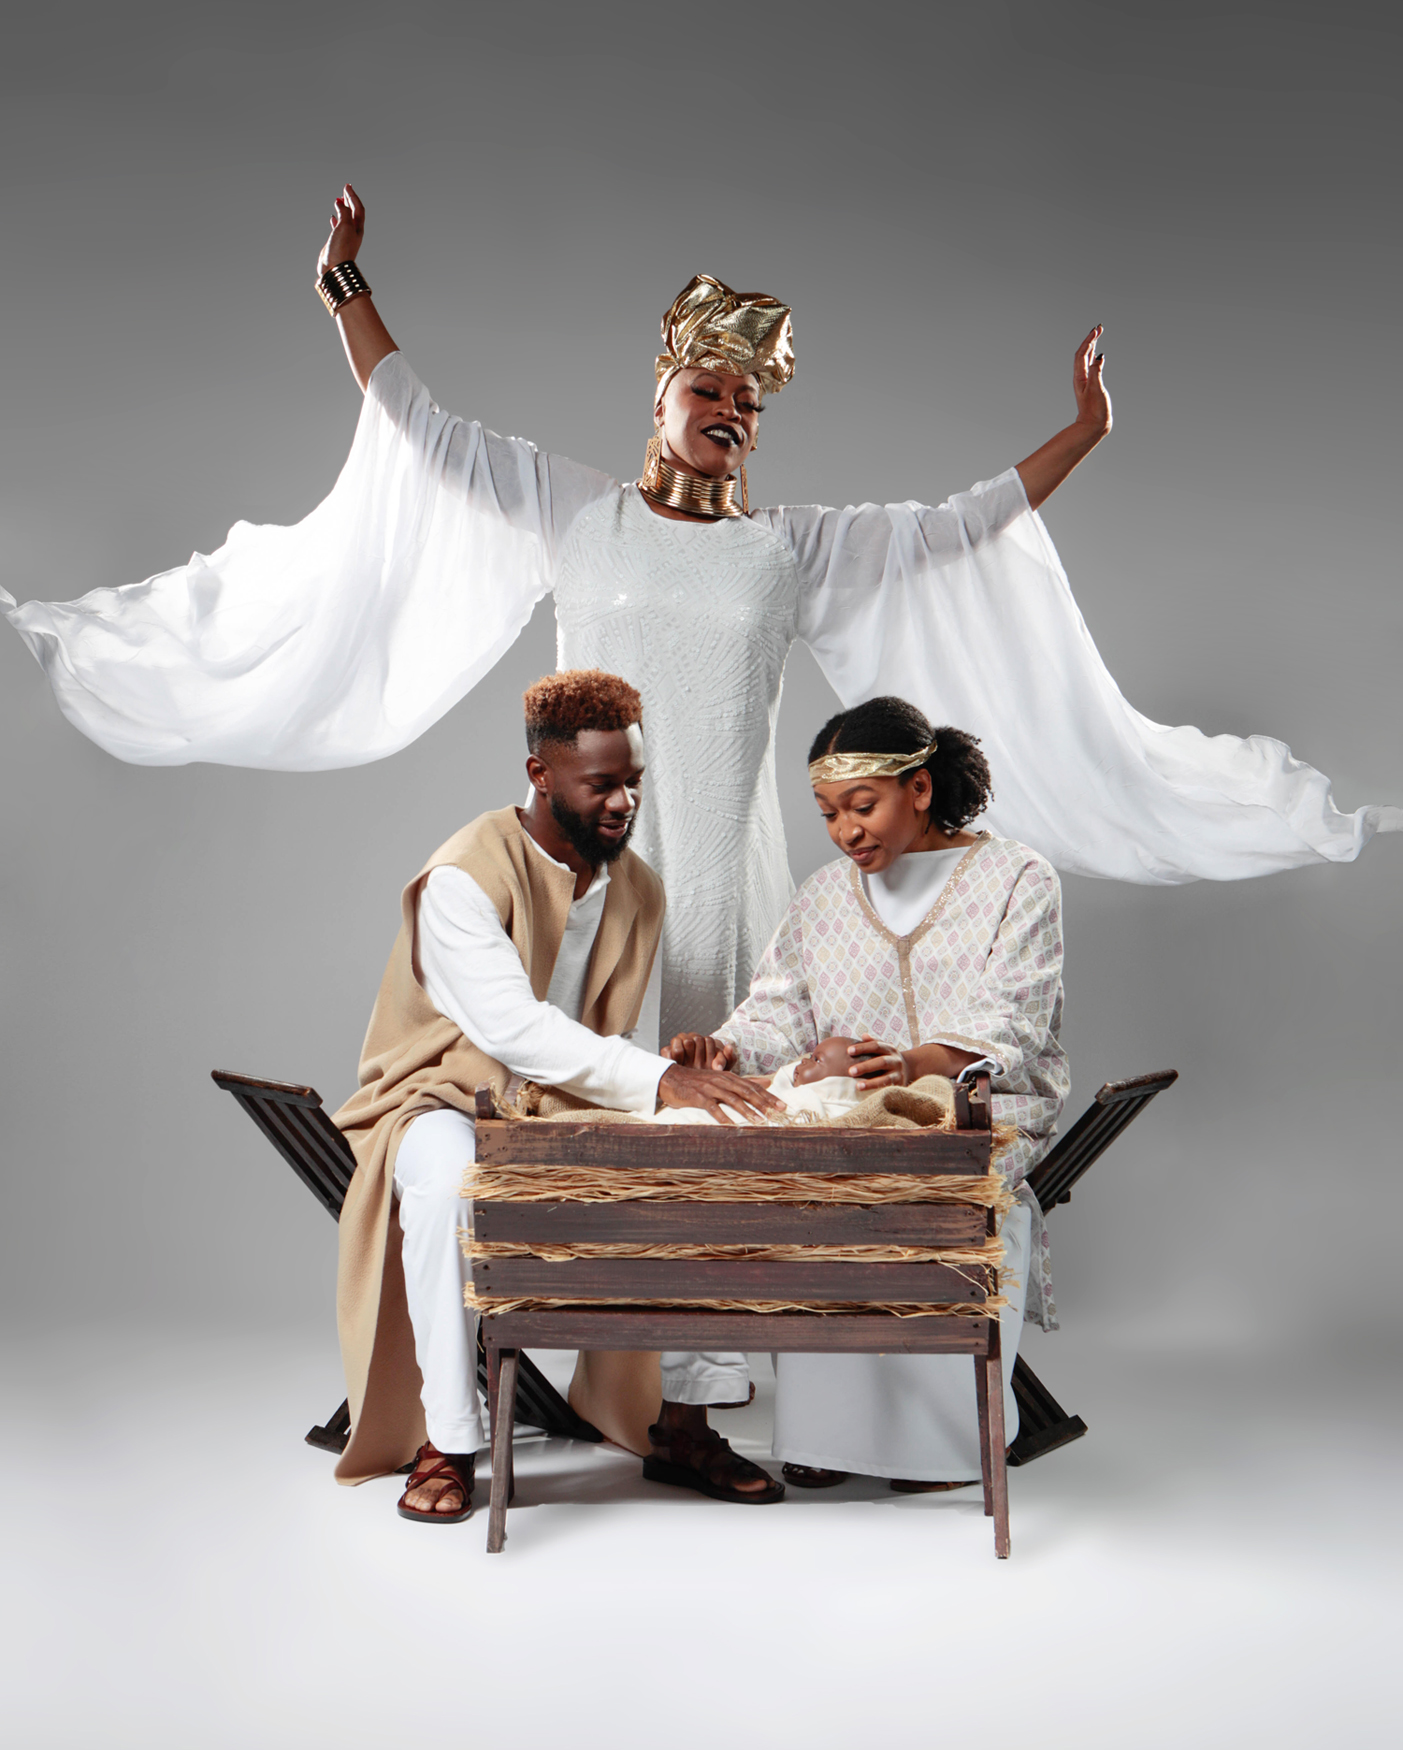 Raleigh Moseley and Maicy Powell pose for Black Nativity photoshoot. They are wearing their costumes dressed as Joseph and Mary.